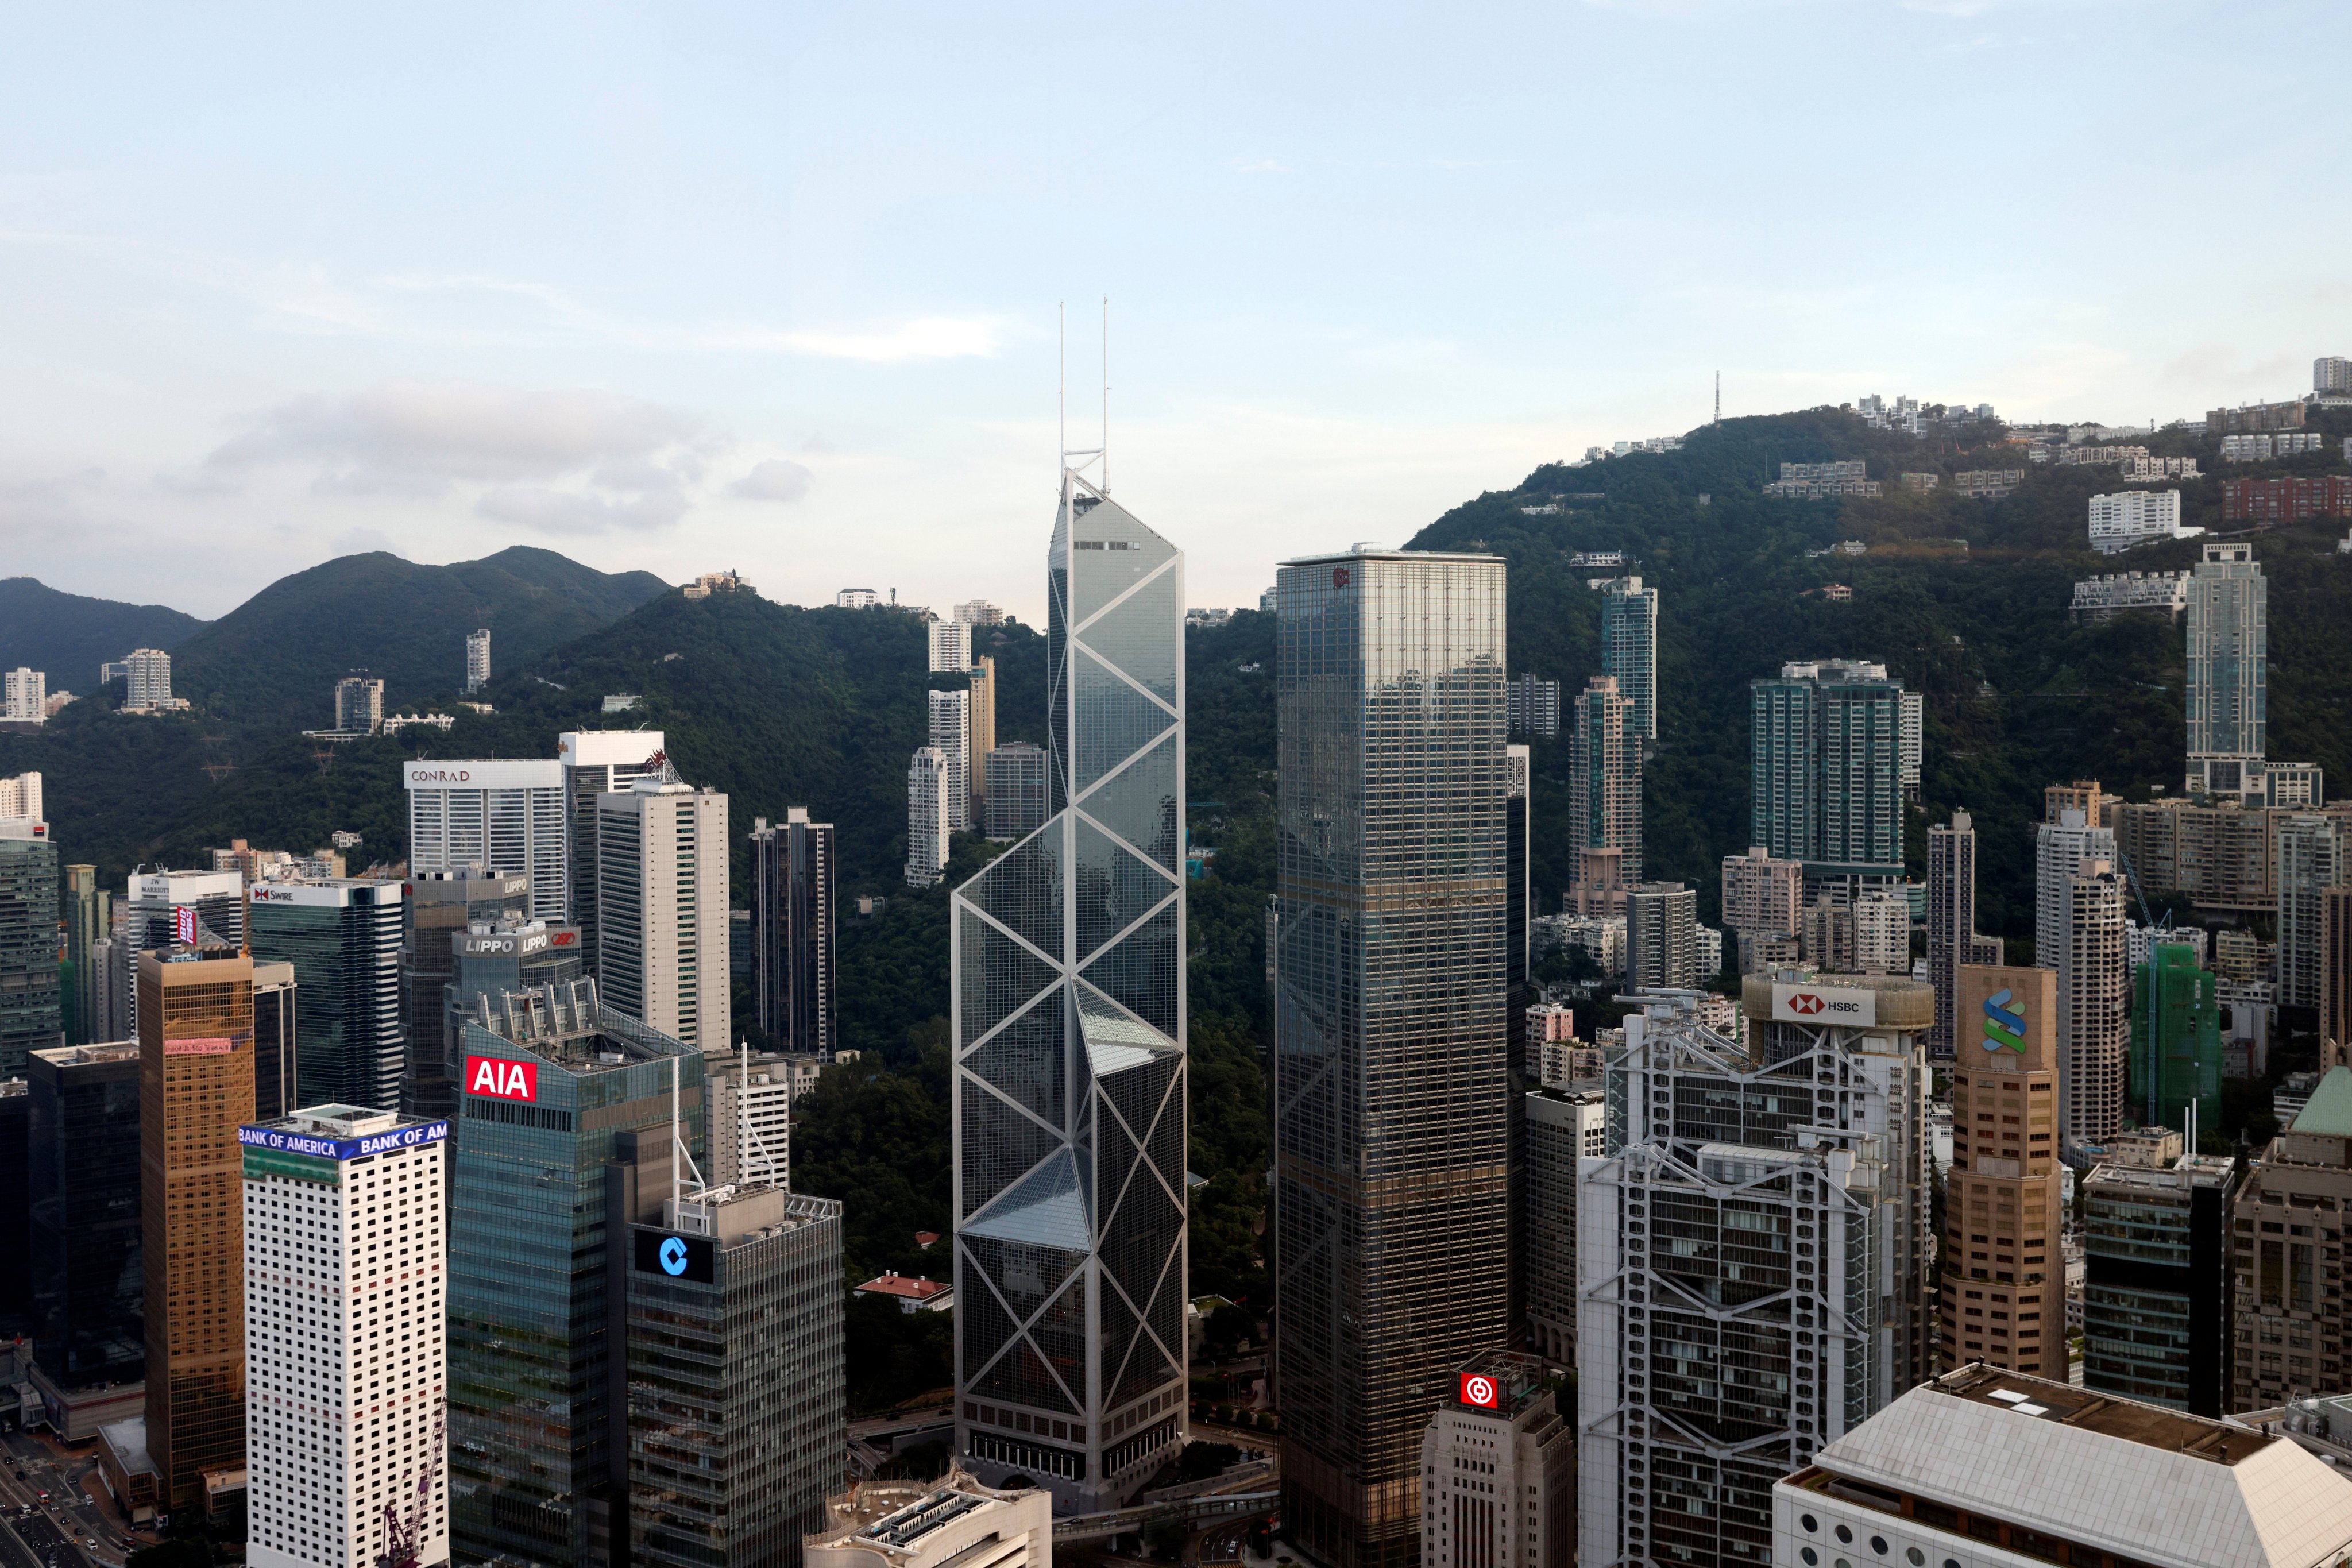 Hong Kong’s Central business district, pictured in September 2021. Photo: Reuters